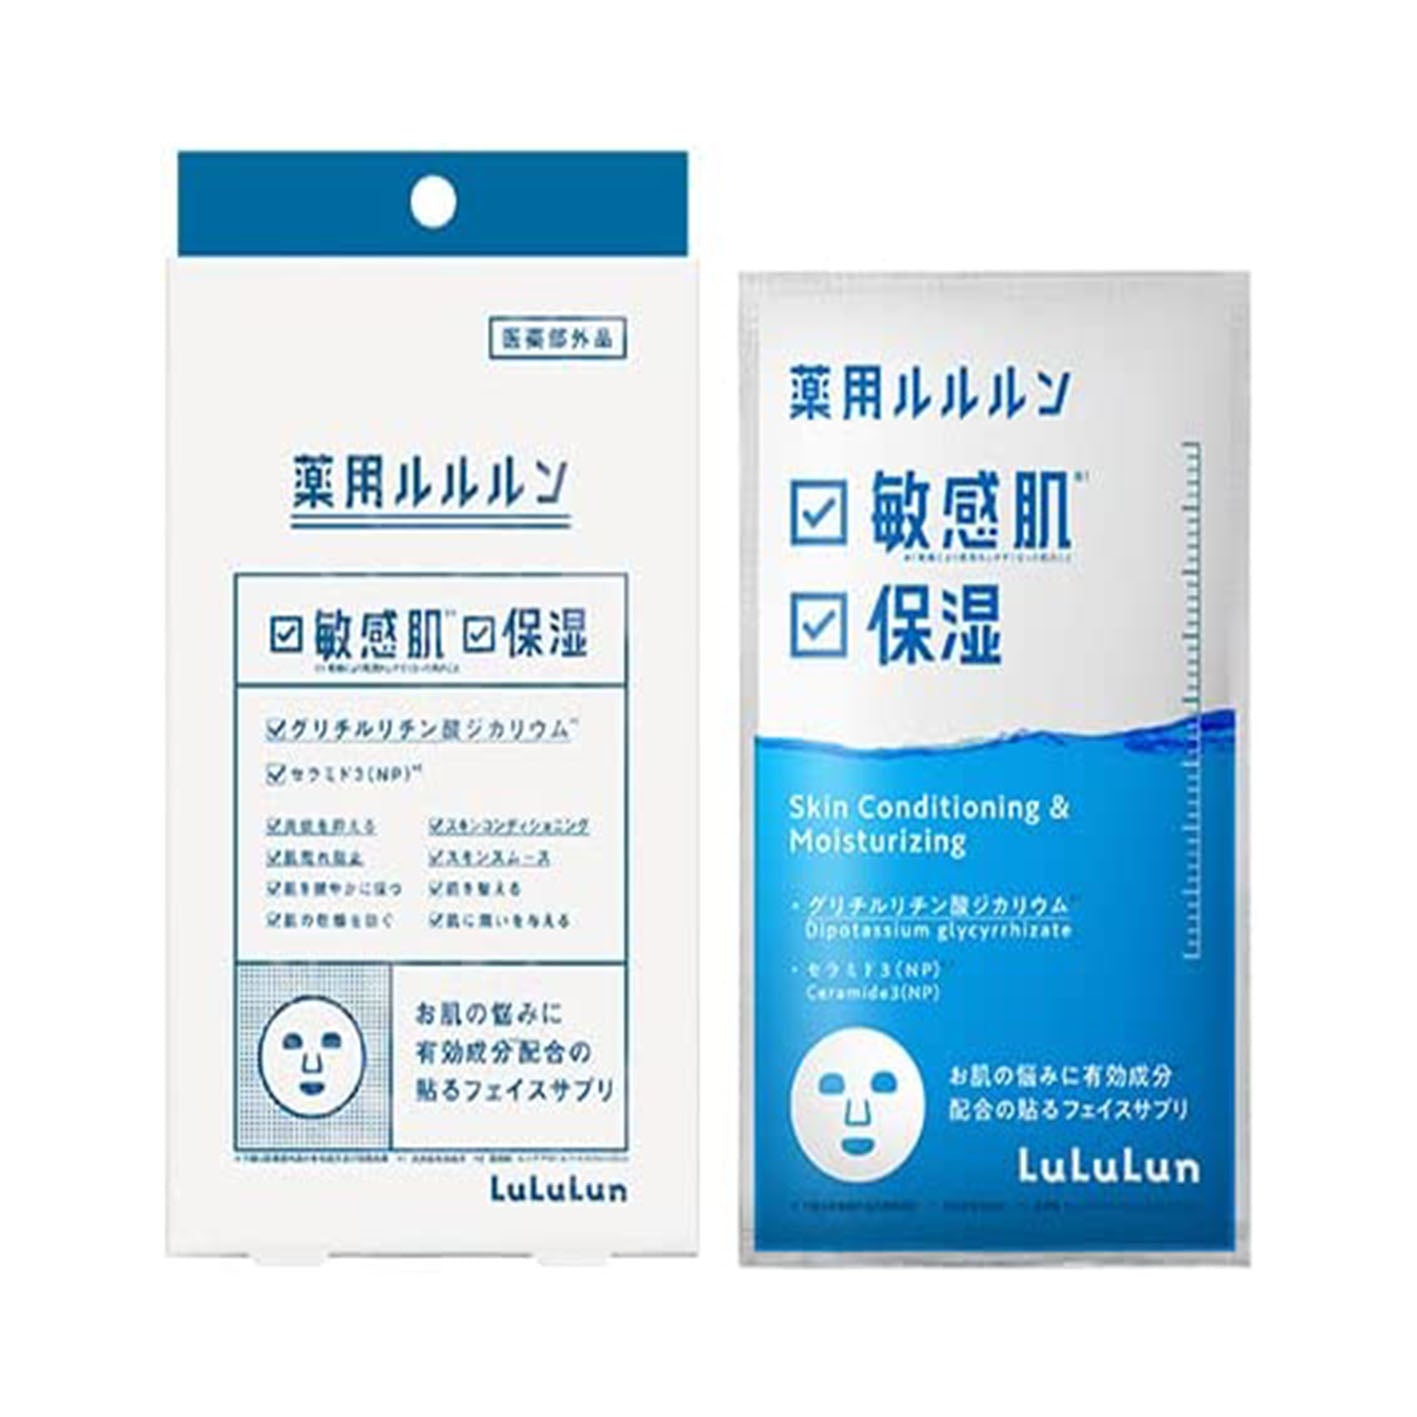 Lululun Medicinal Moisturizing Skin Condition Face Mask 4pcs - Harajuku Culture Japan - Japanease Products Store Beauty and Stationery